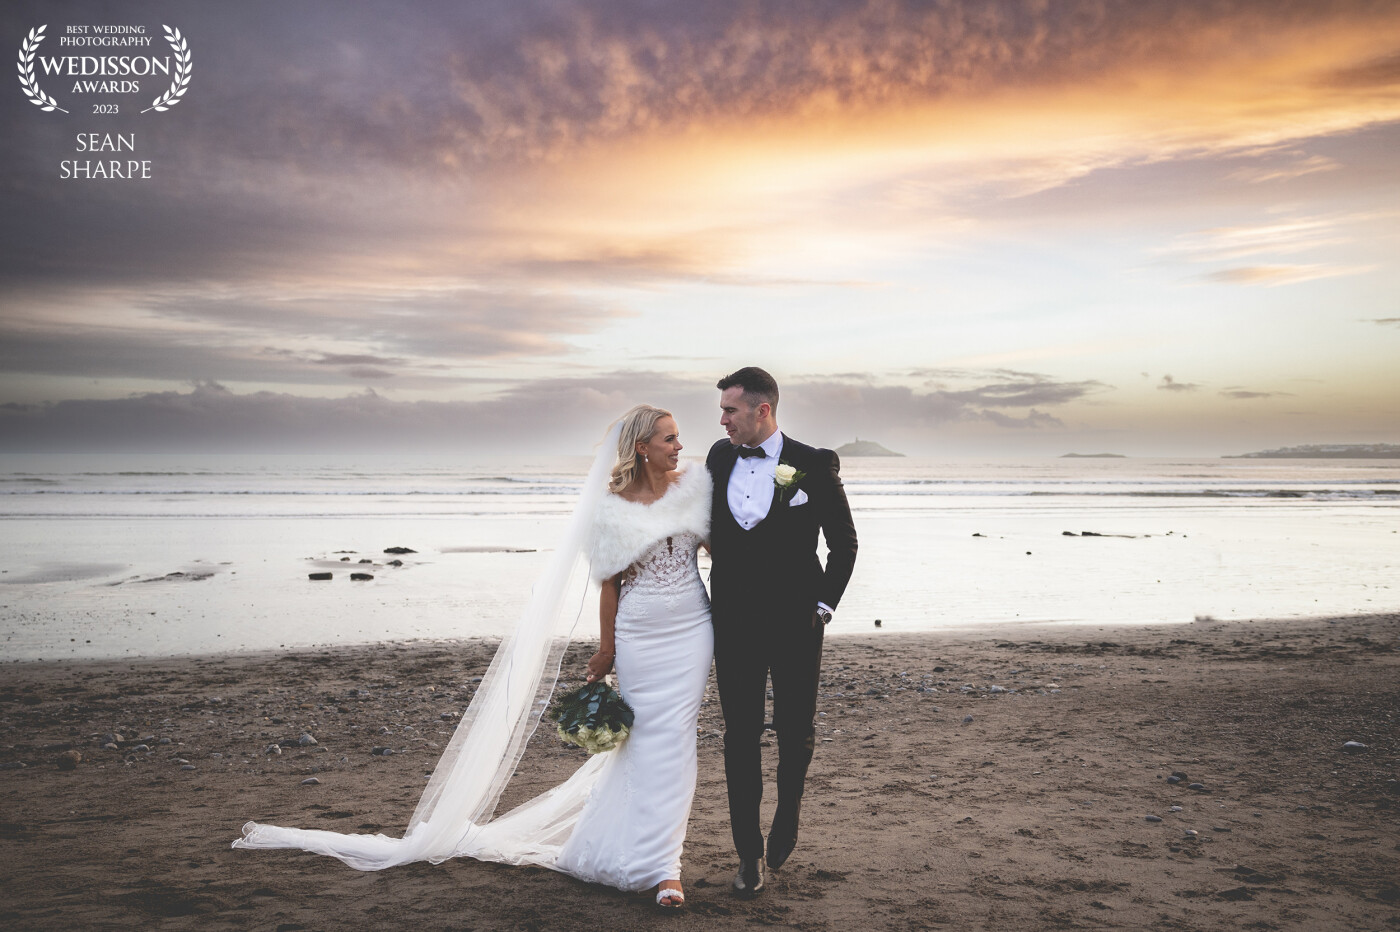 When two of your best friends get married and the sky produces that sunset! Such a honour to have shot Kieran and Michelle's Big Day in December. Really worth stopping off and getting these shots before the sun set.